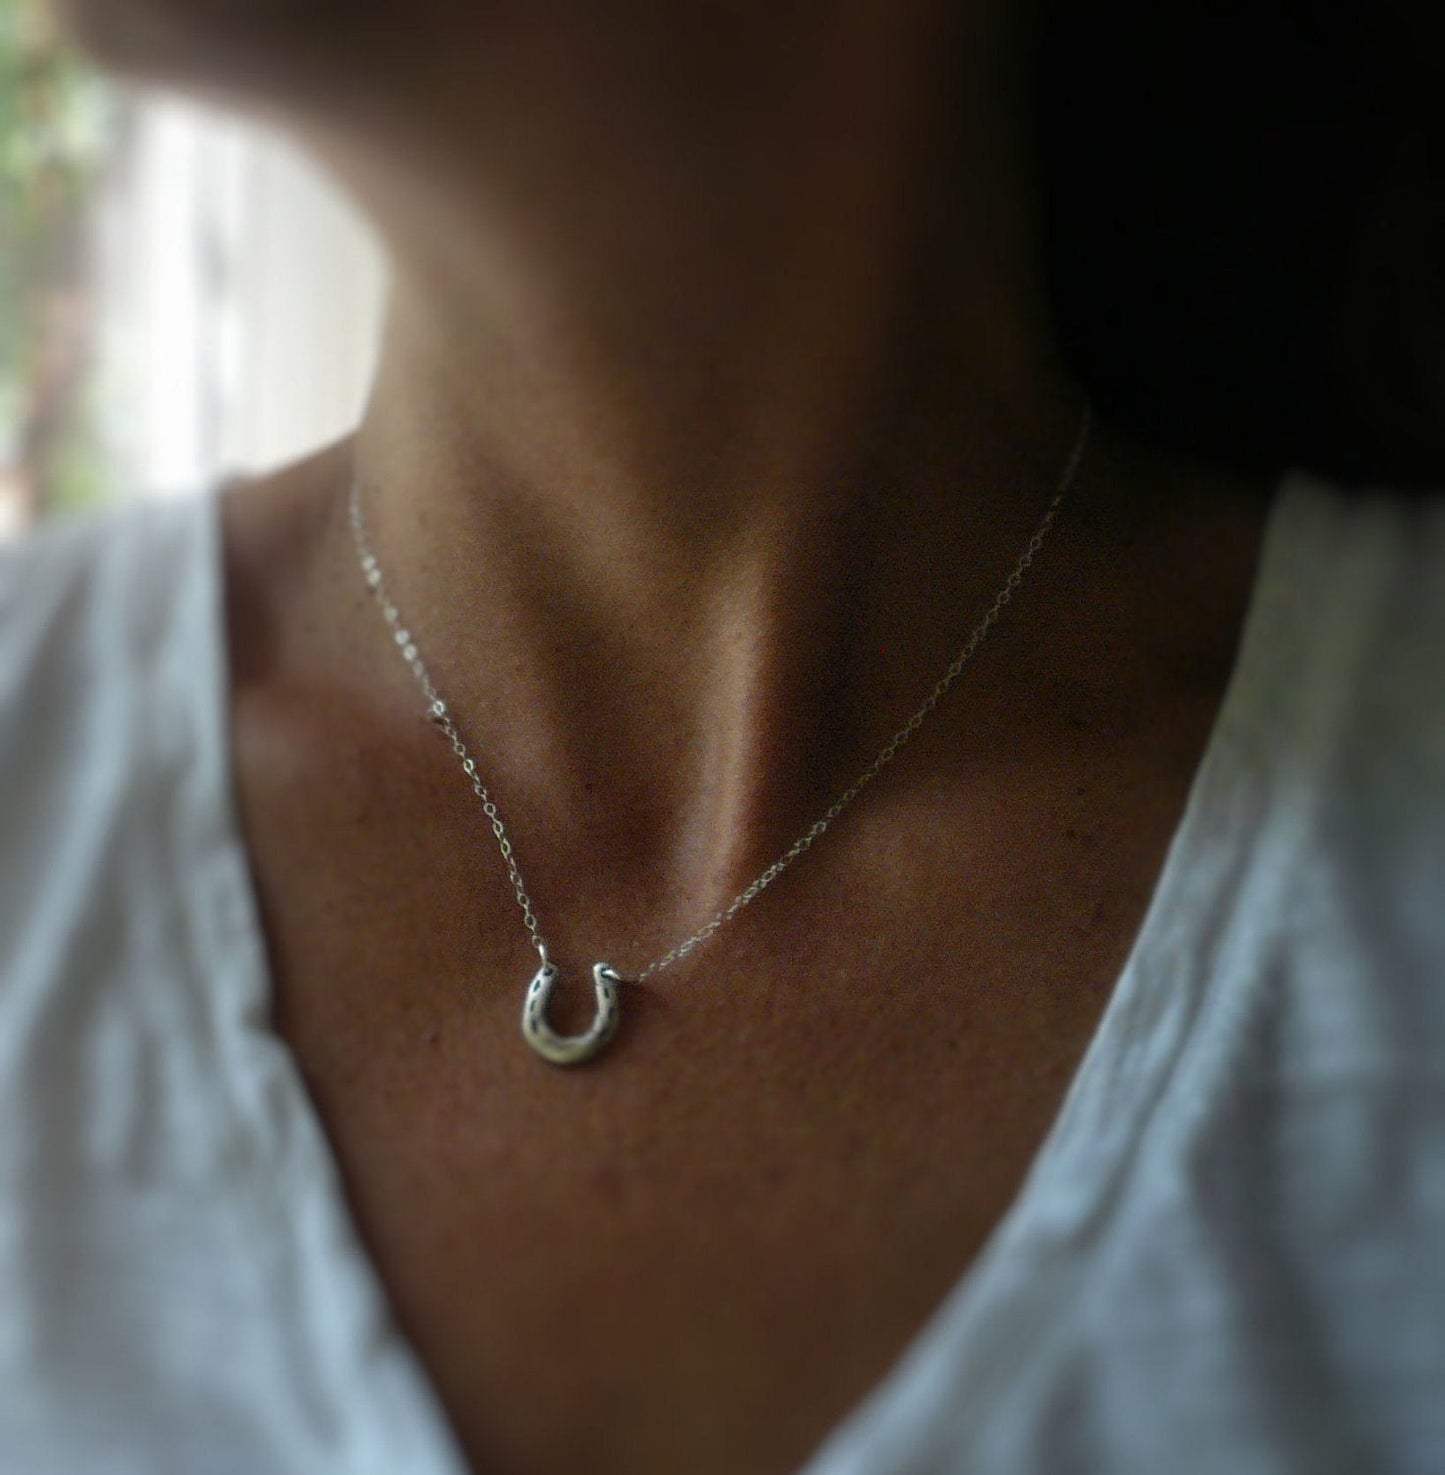 Lucky Necklace - Handmade. Oxidized Fine and Sterling Silver